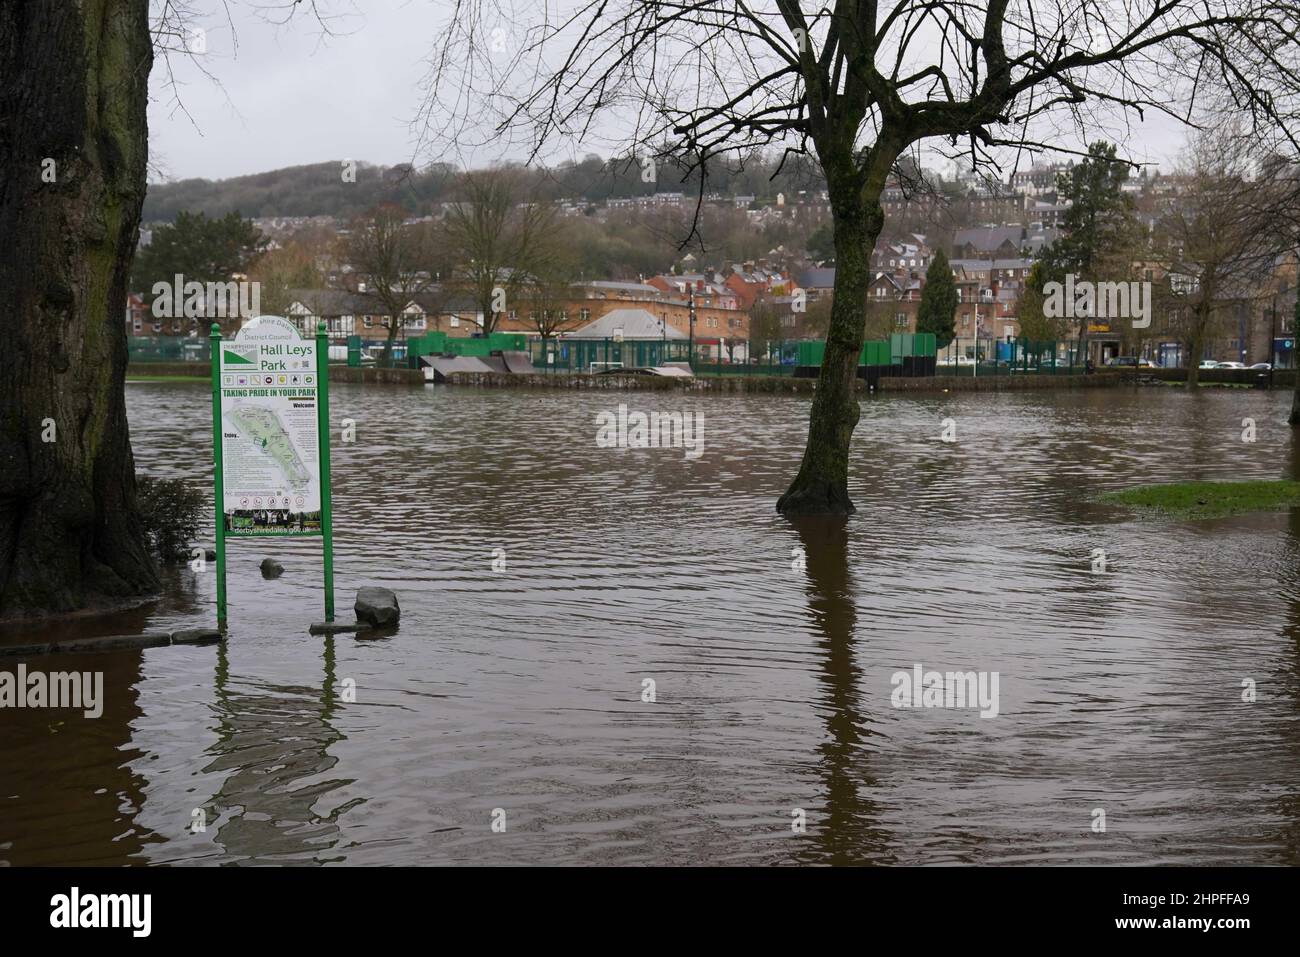 Hall Leys Park is flooded in Matlock, Derbyshire, as Britons have been warned to brace for strengthening winds and lashing rain as Storm Franklin moved in overnight, just days after Storm Eunice destroyed buildings and left 1.4 million homes without power. Picture date: Monday February 21, 2022. Stock Photo